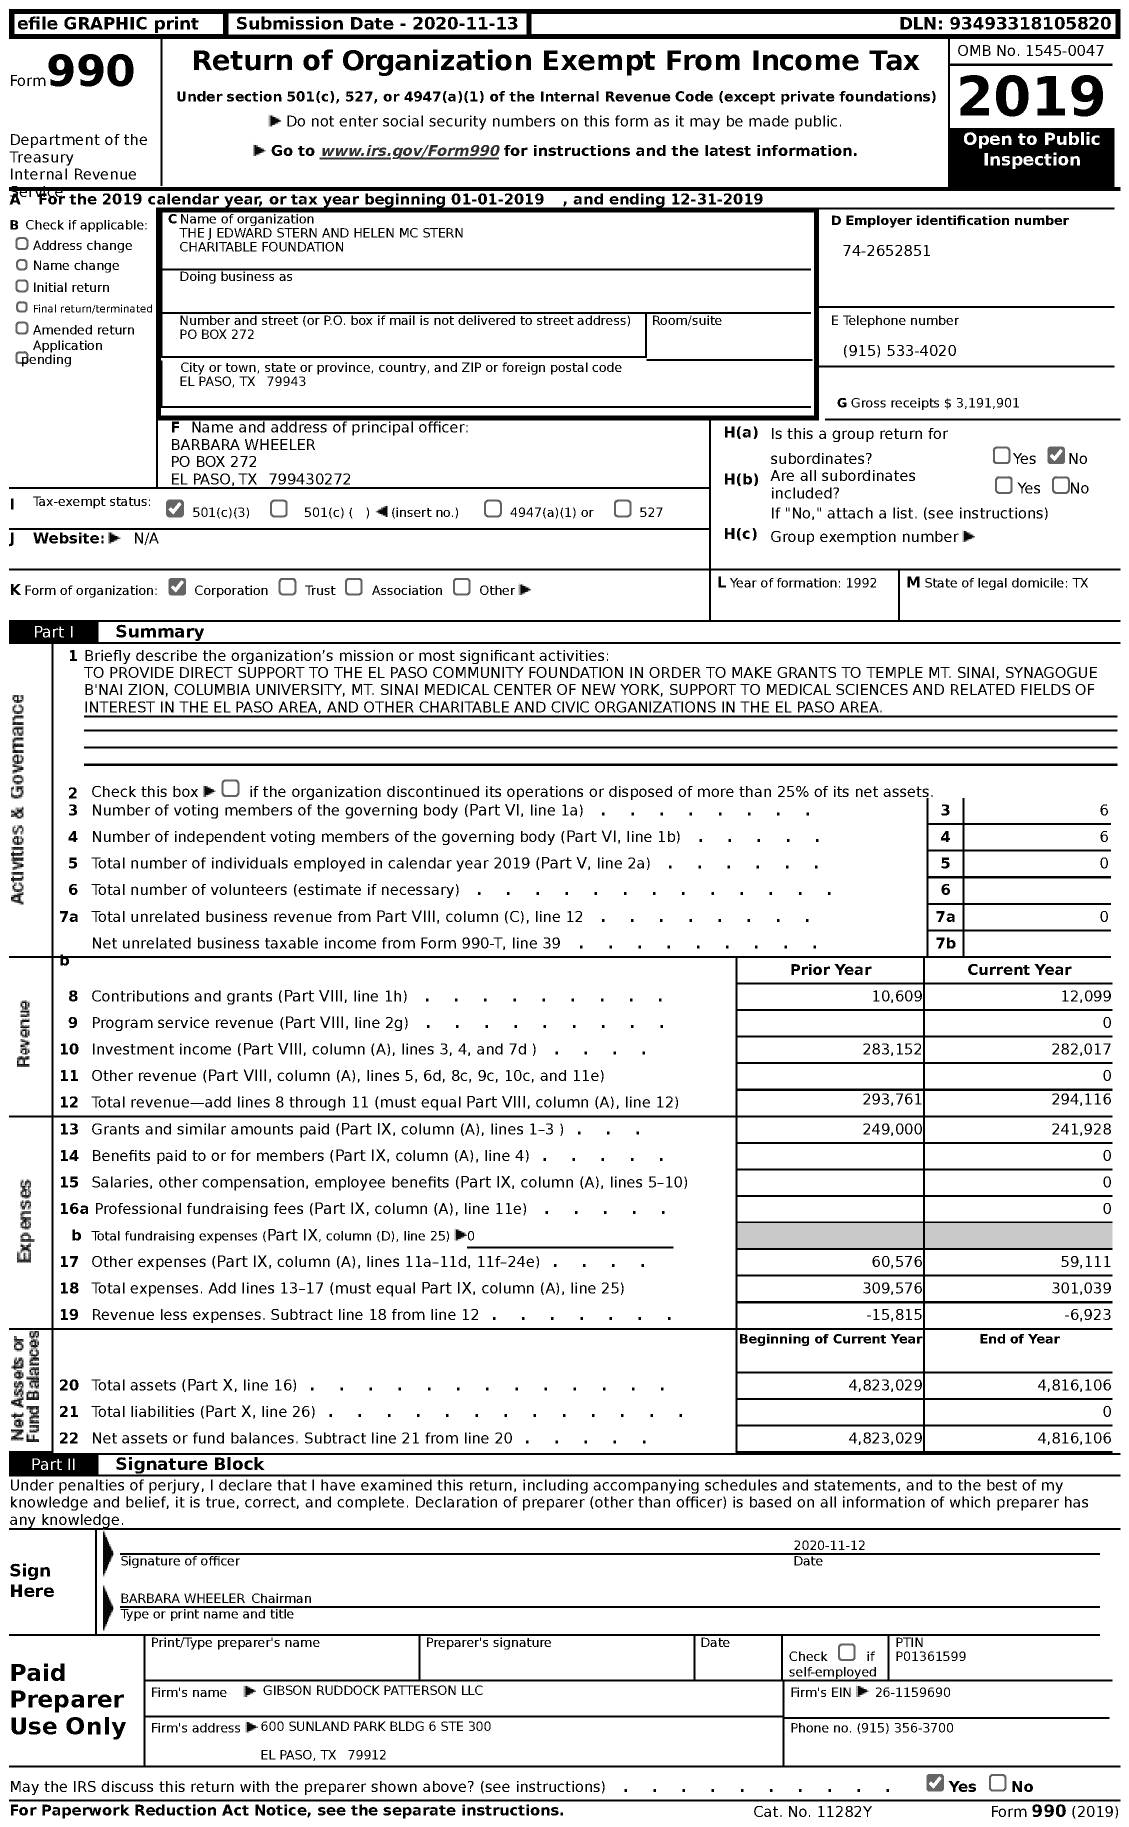 Image of first page of 2019 Form 990 for The J Edward Stern and Helen MC Stern Charitable Foundation